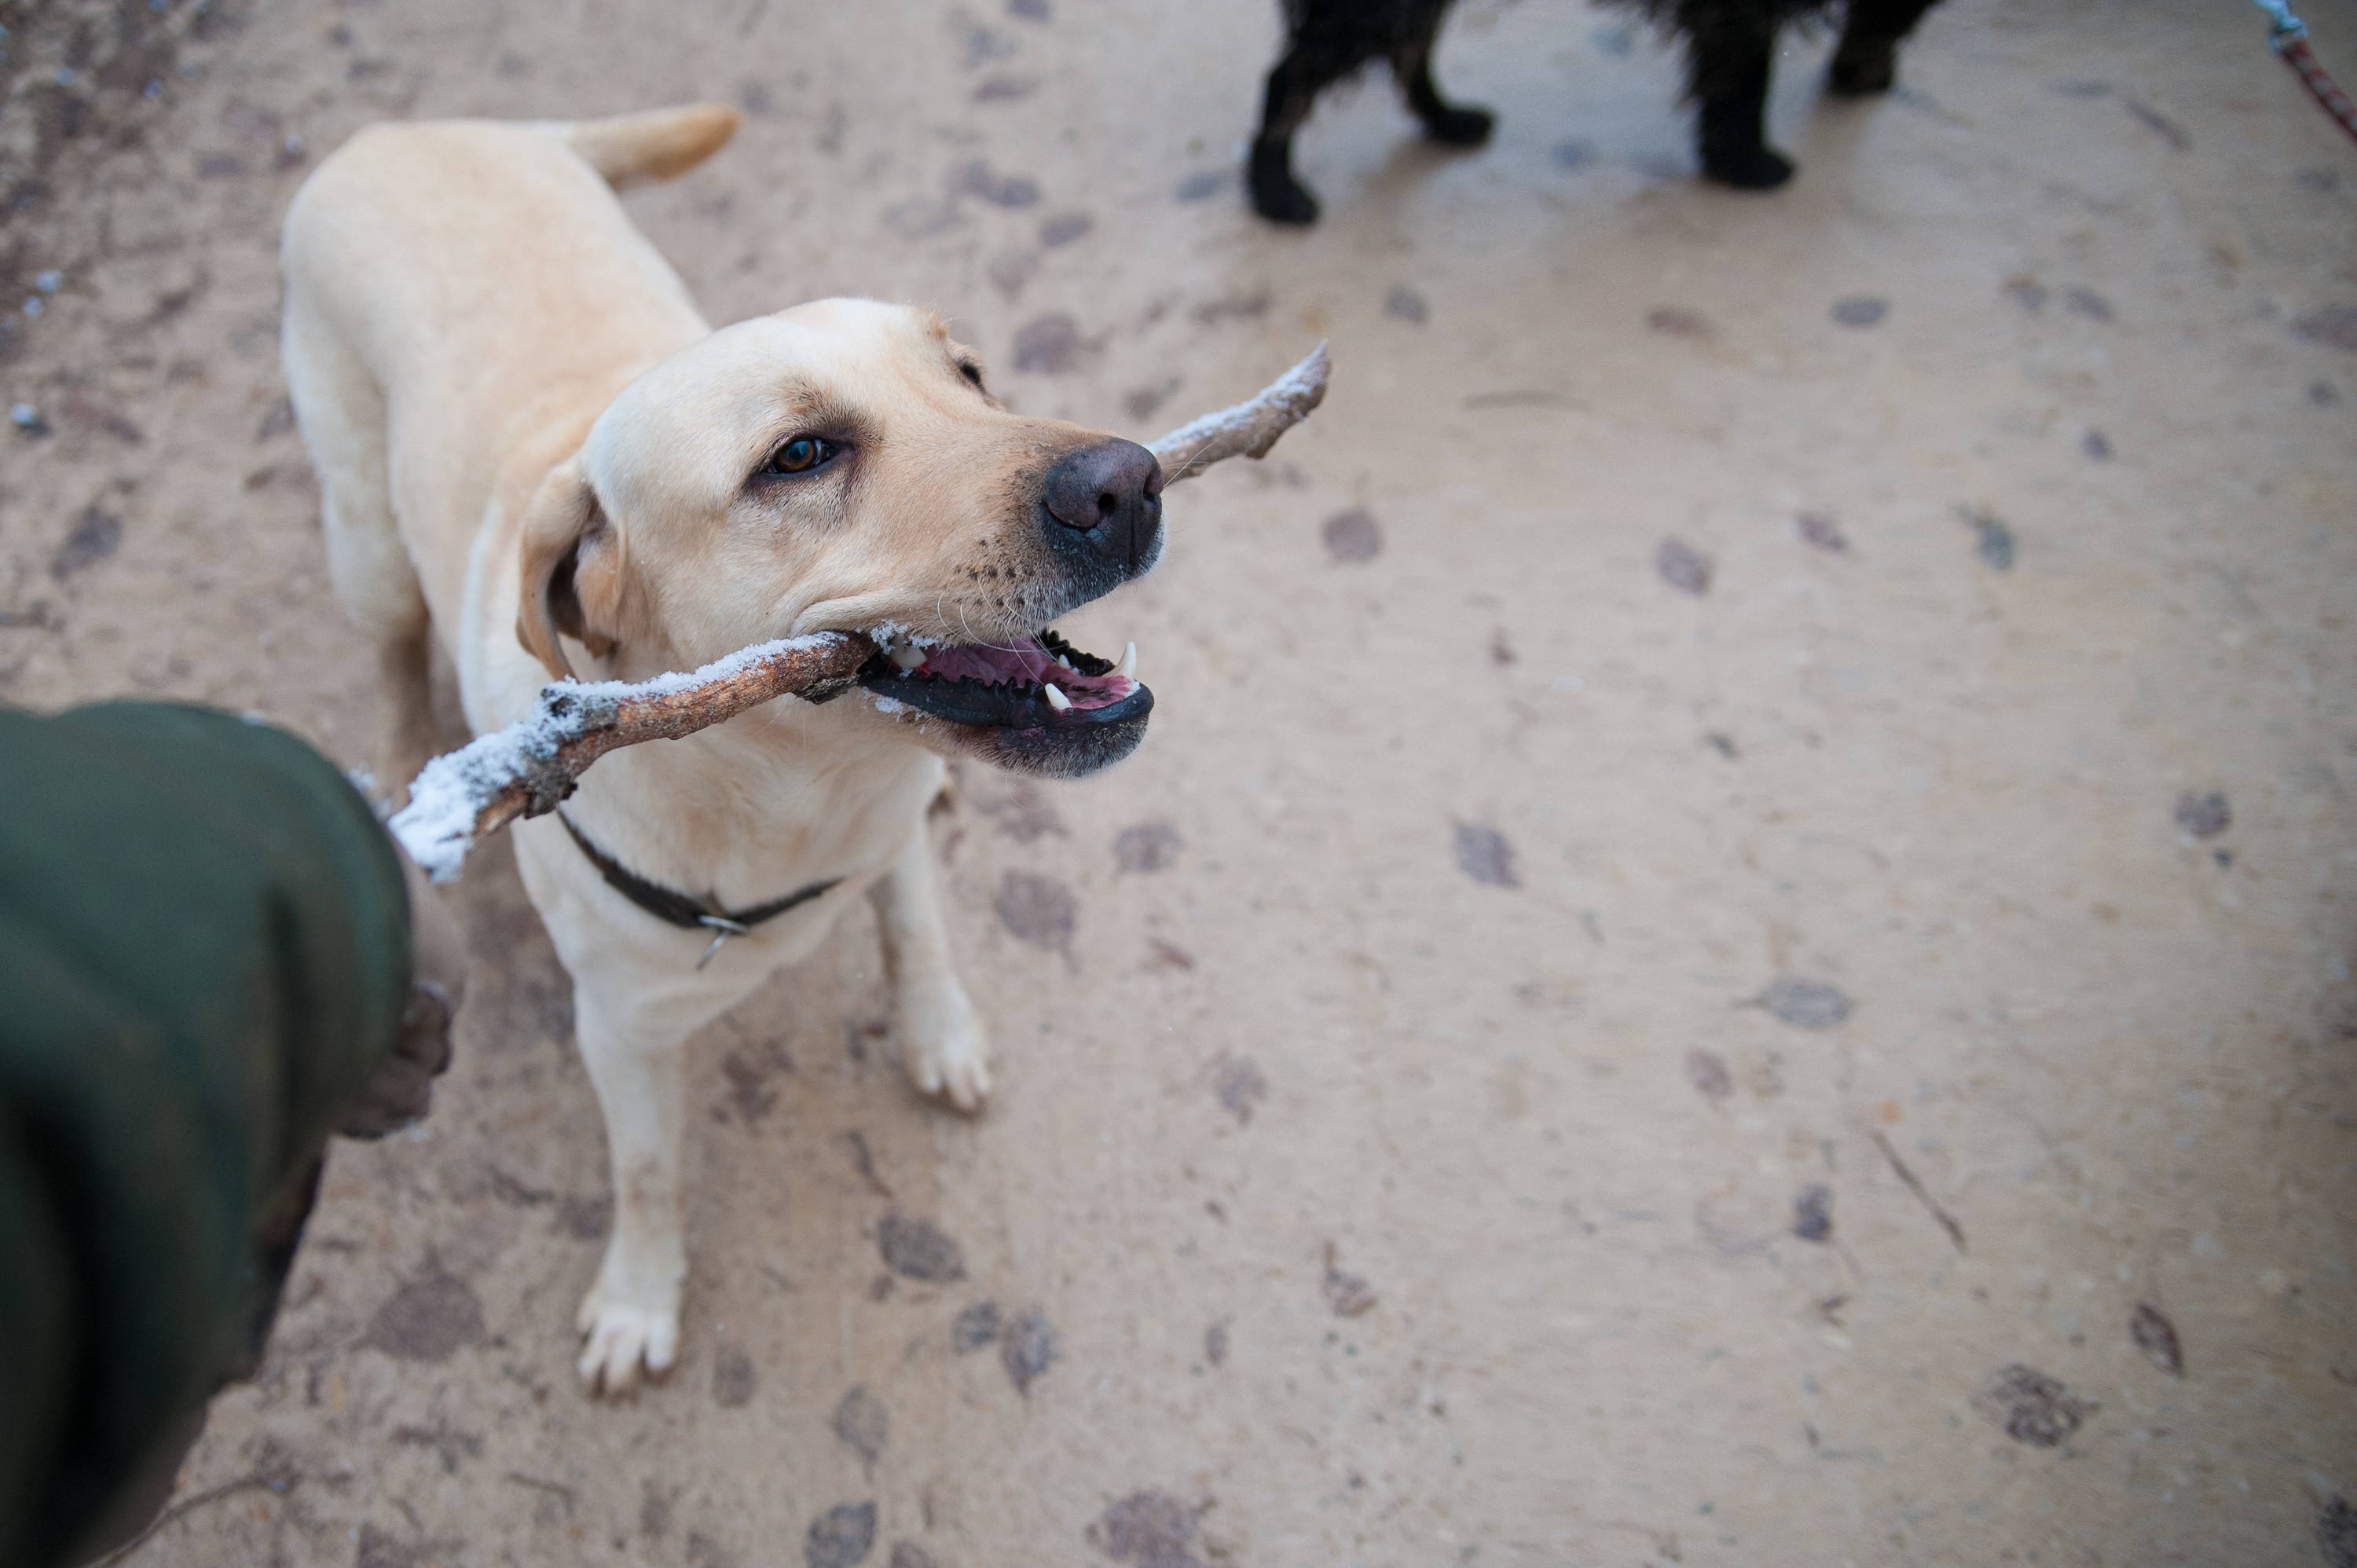 5 Dog Park Tips To Avoid Issues With Other Dogs And Their Owners - Team K9